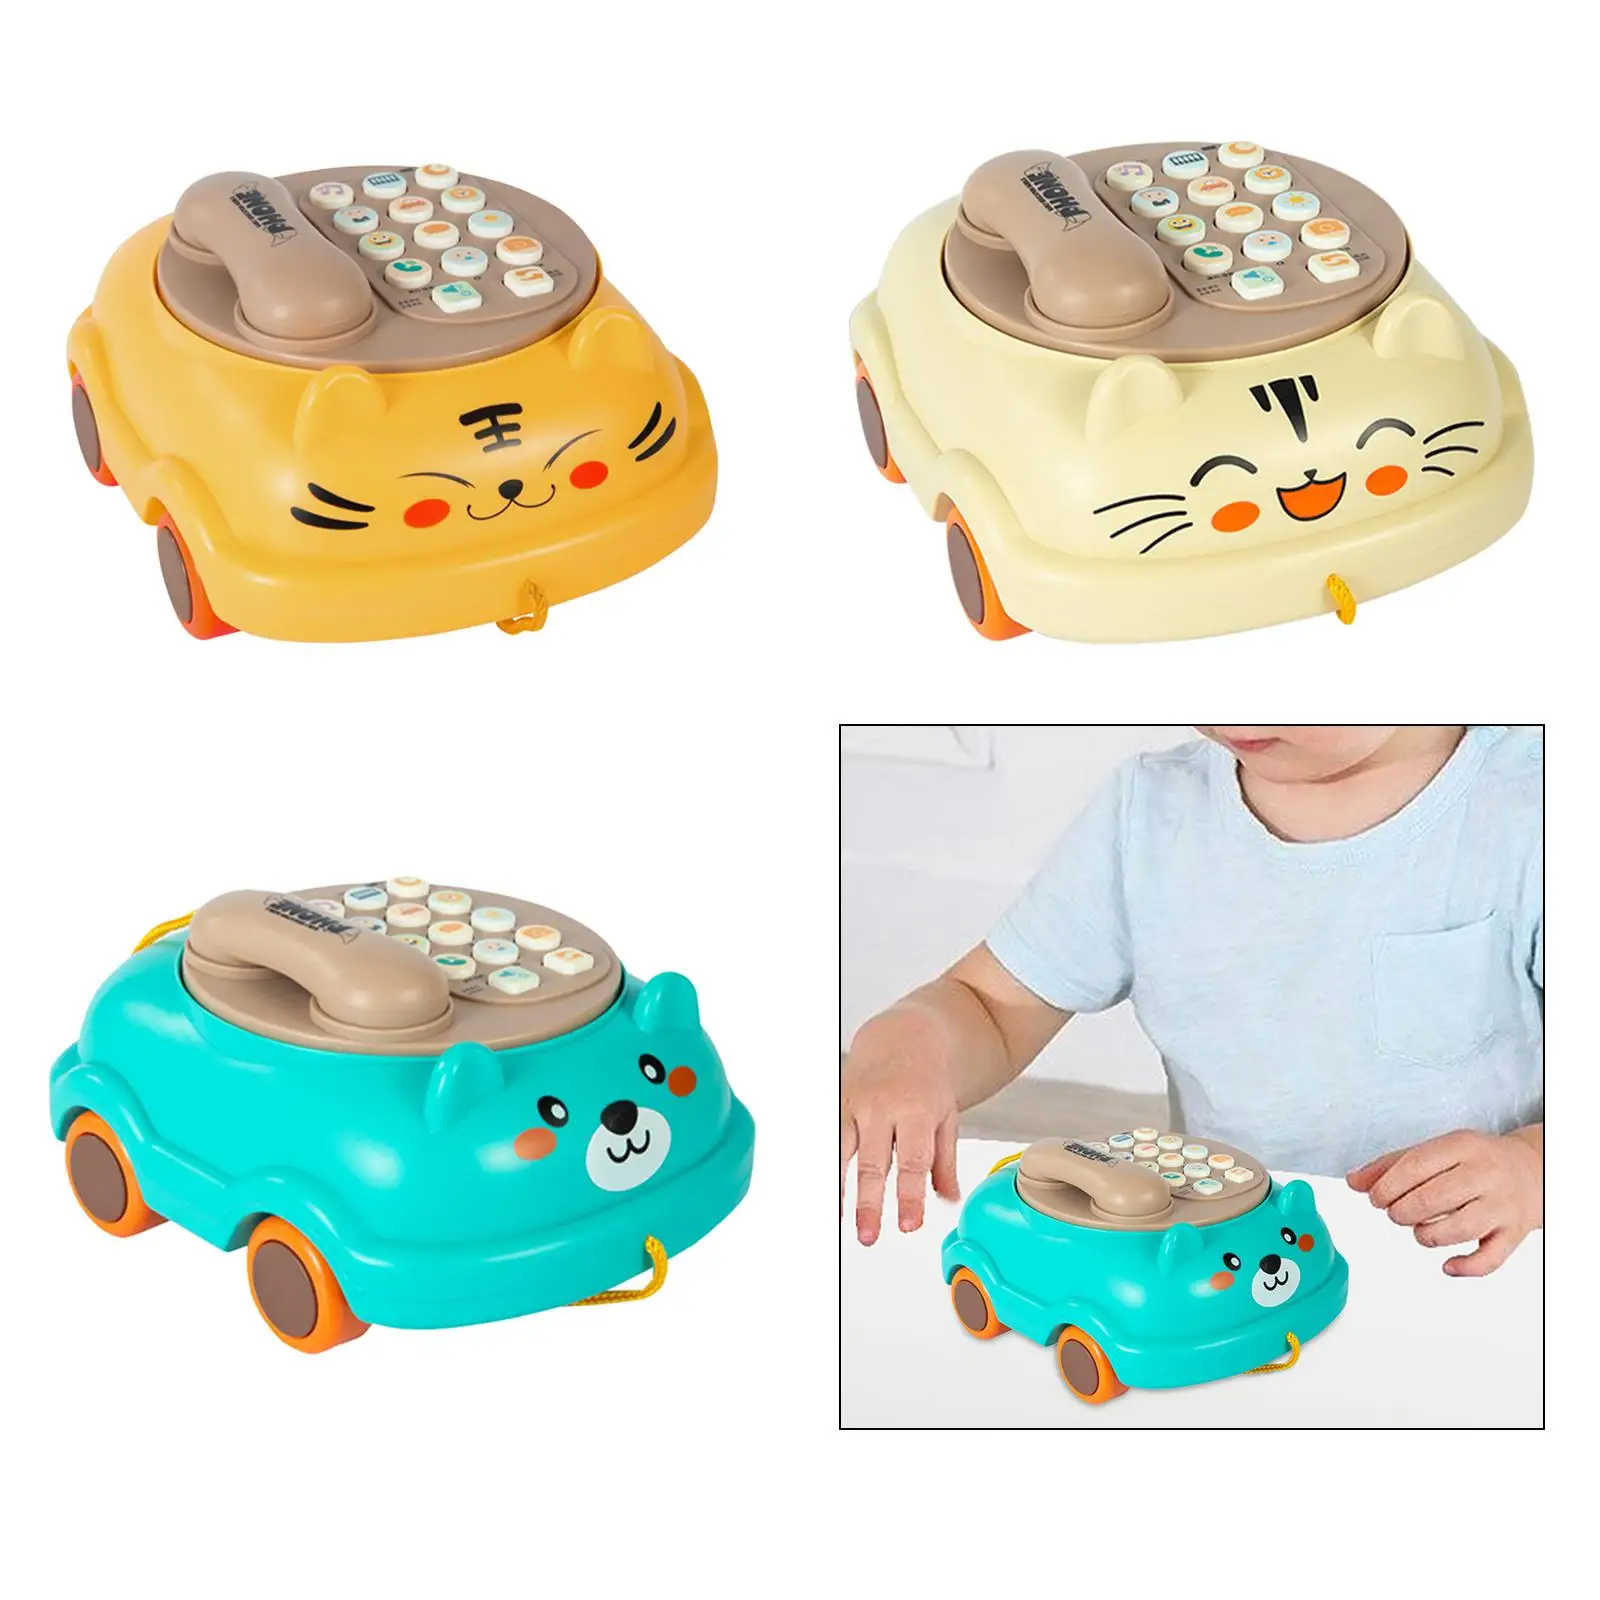 Baby Educational Learning Toy Piano Lights Kid Phone Montessori for Boys 3 Years Old Children Creative Gift Early Education Gift